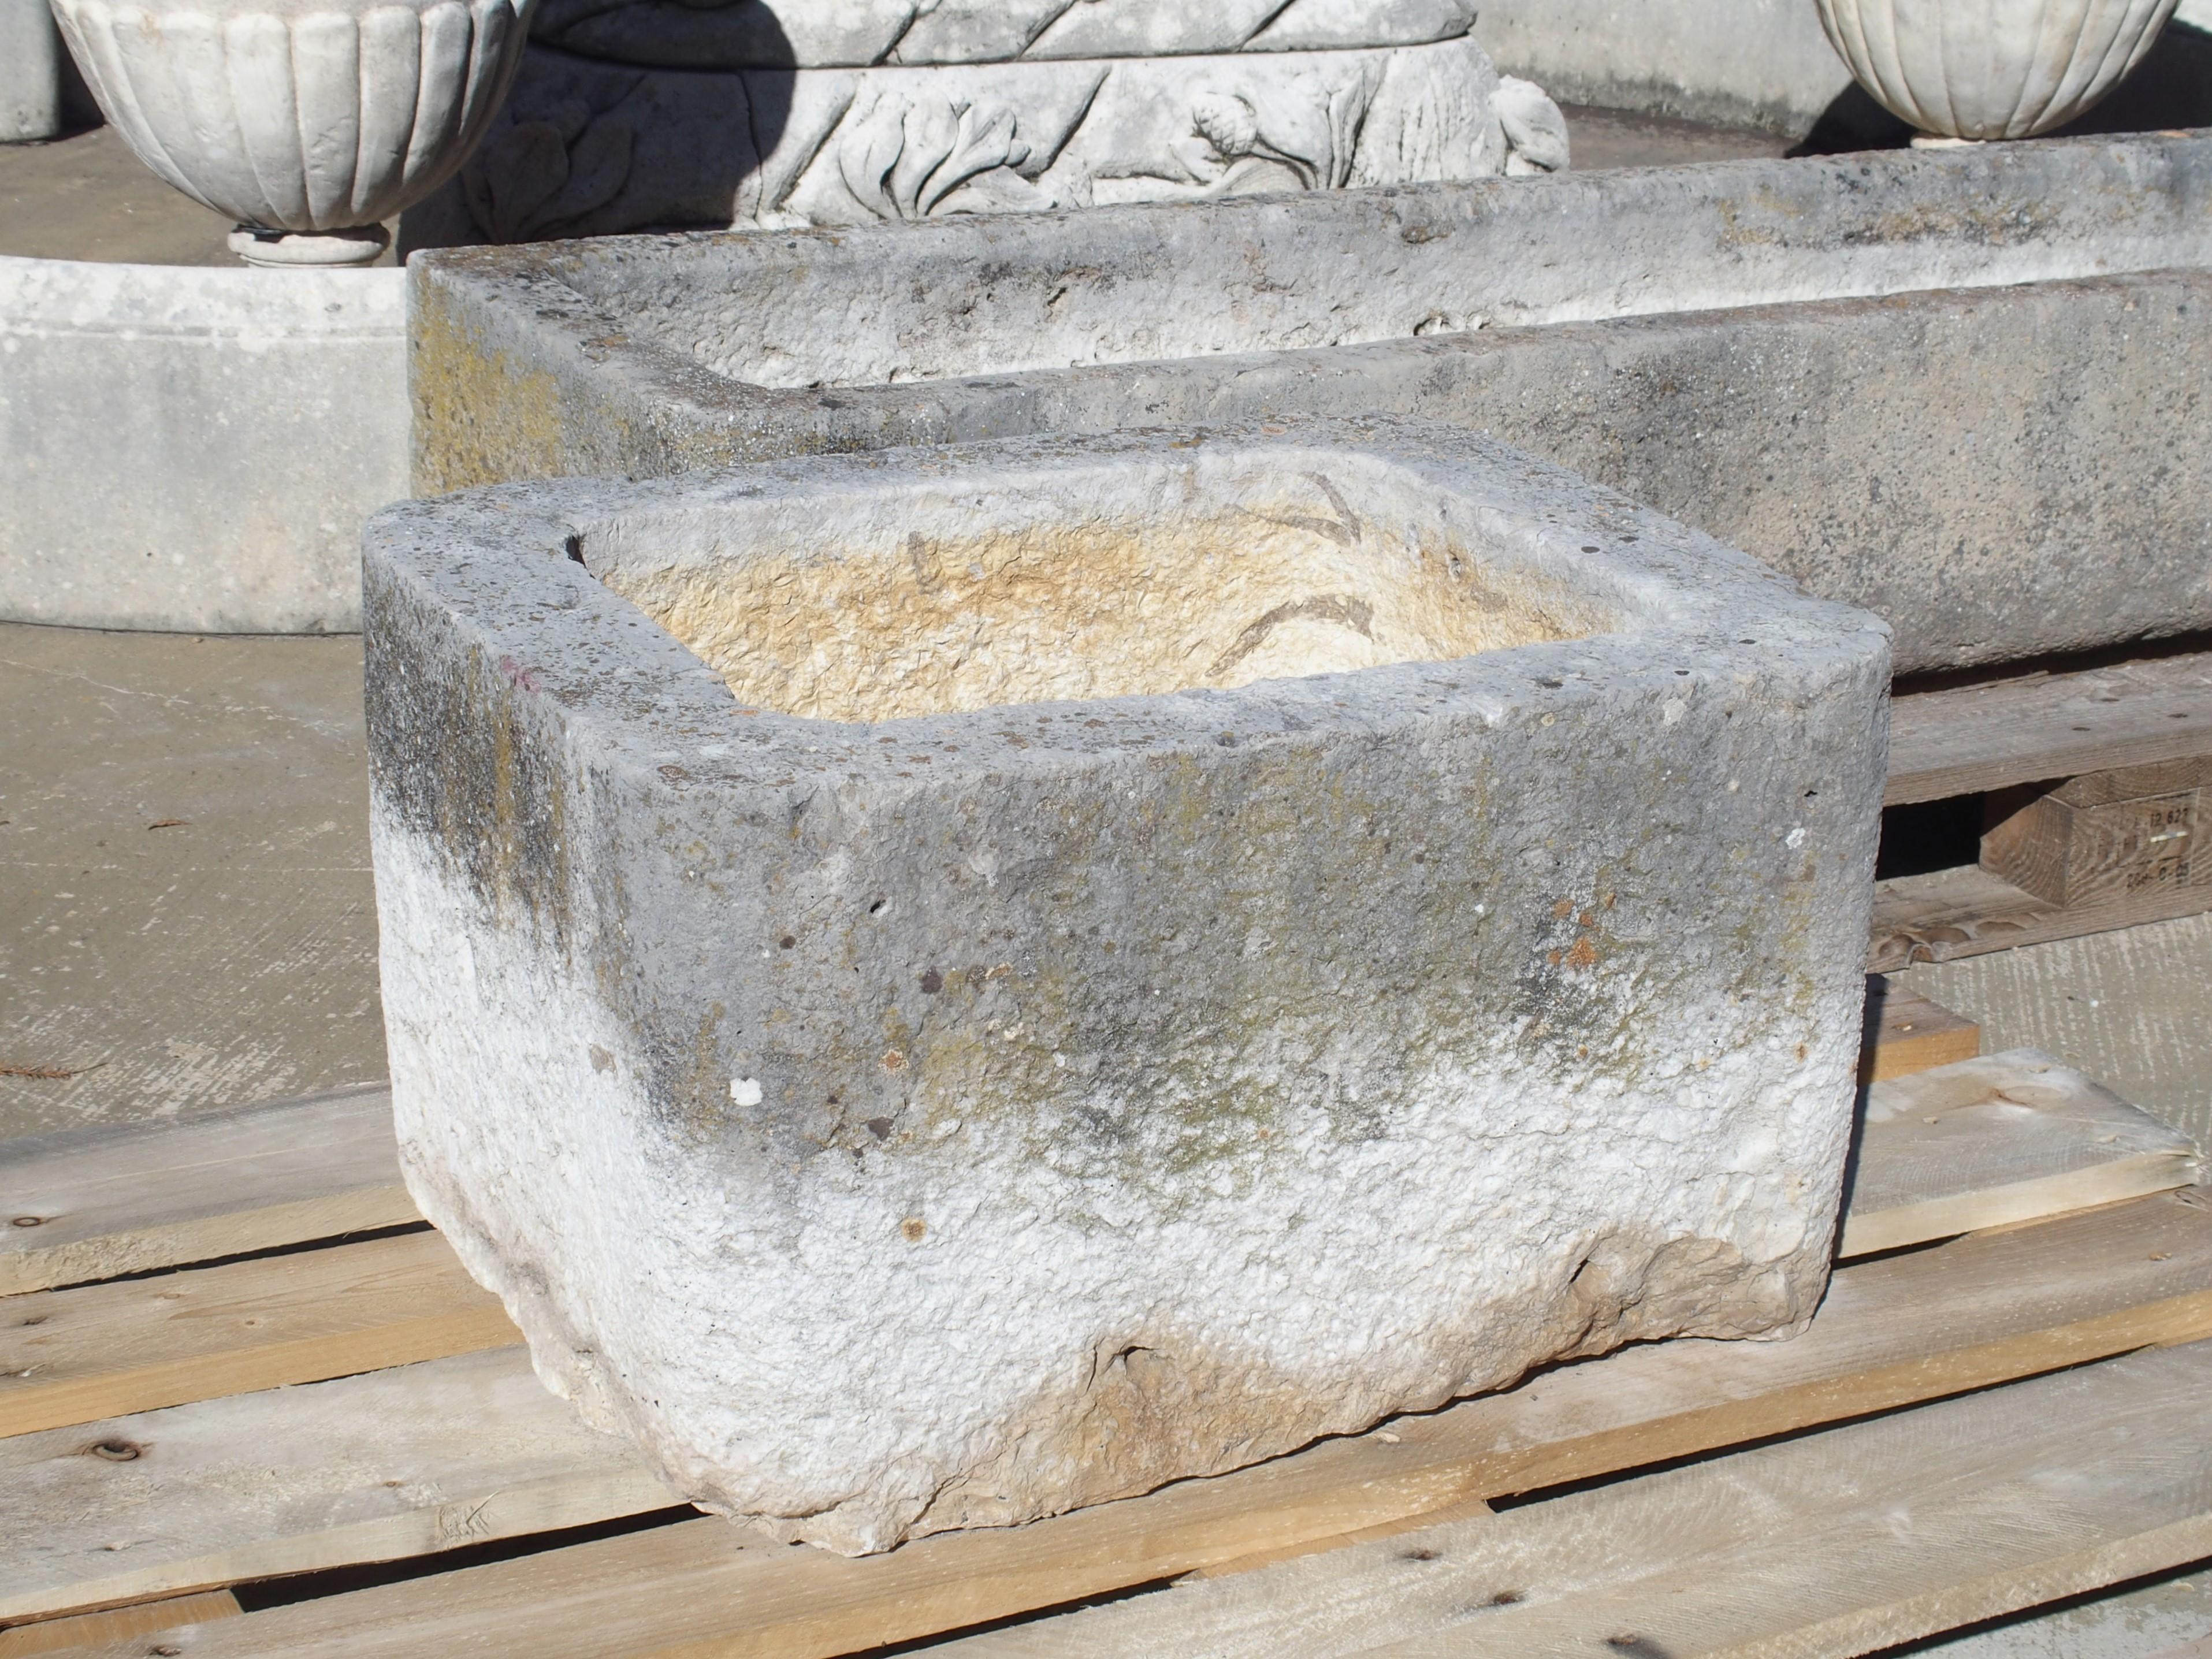 Stone troughs have been used to water livestock in rural Europe for many centuries so it’s often difficult to date them. However, it is known that they were replaced by cast iron models in the mid-19th century, placing the creation of this French